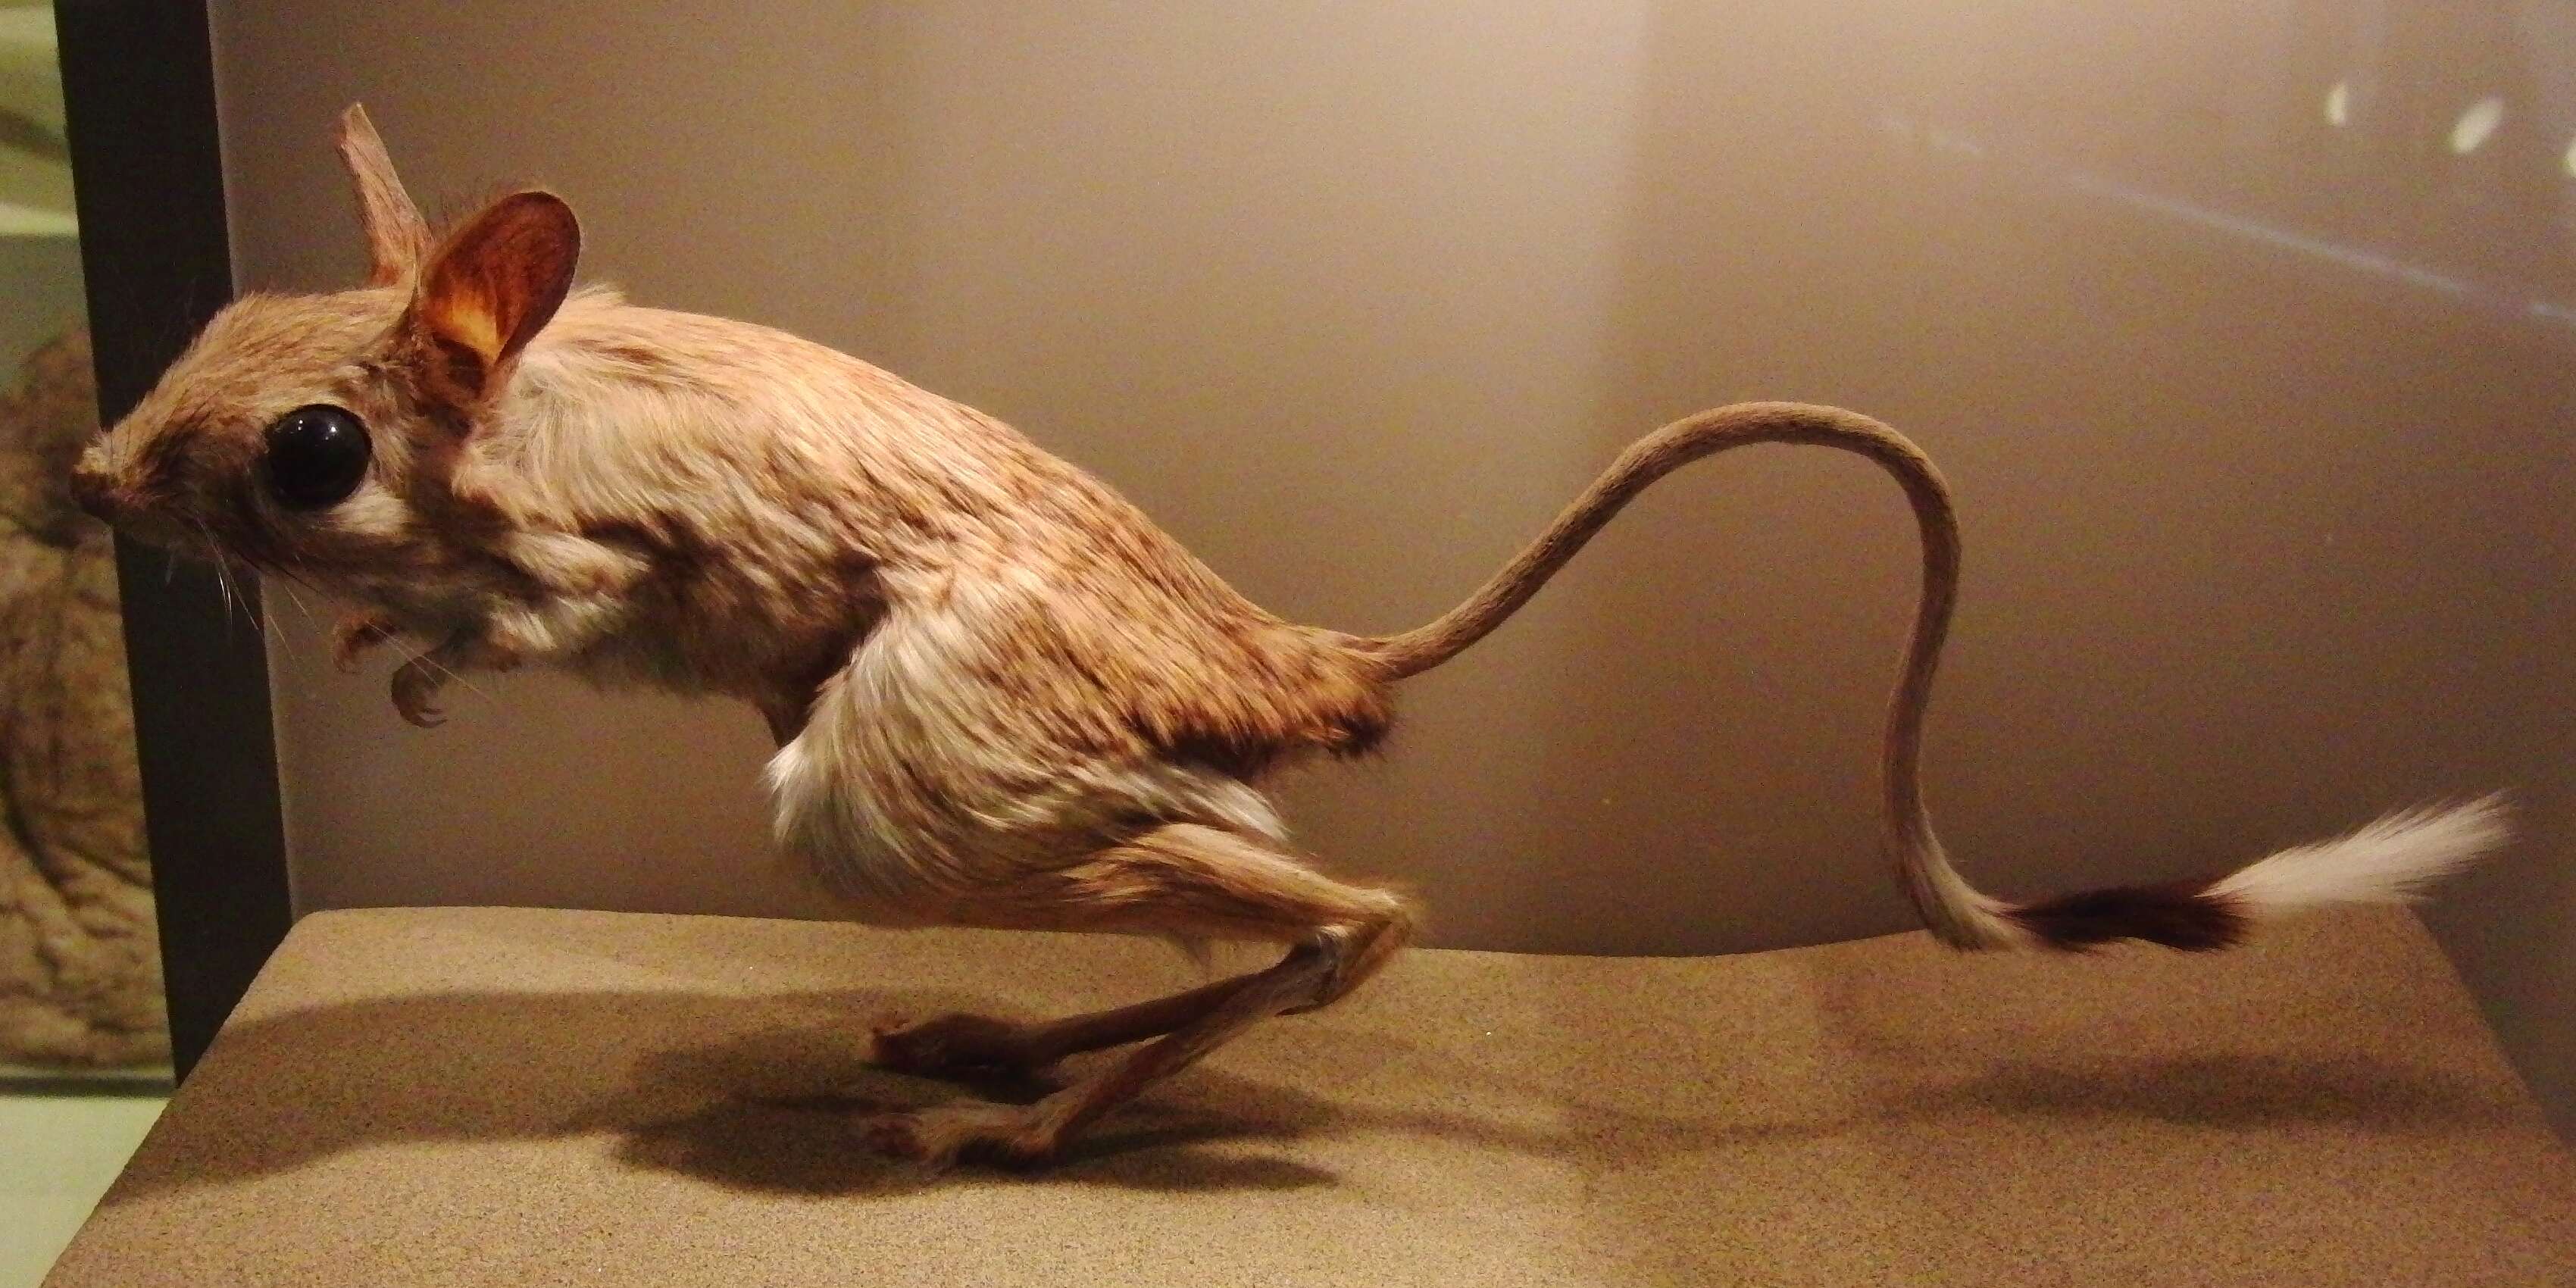 Image of Greater Egyptian Jerboa